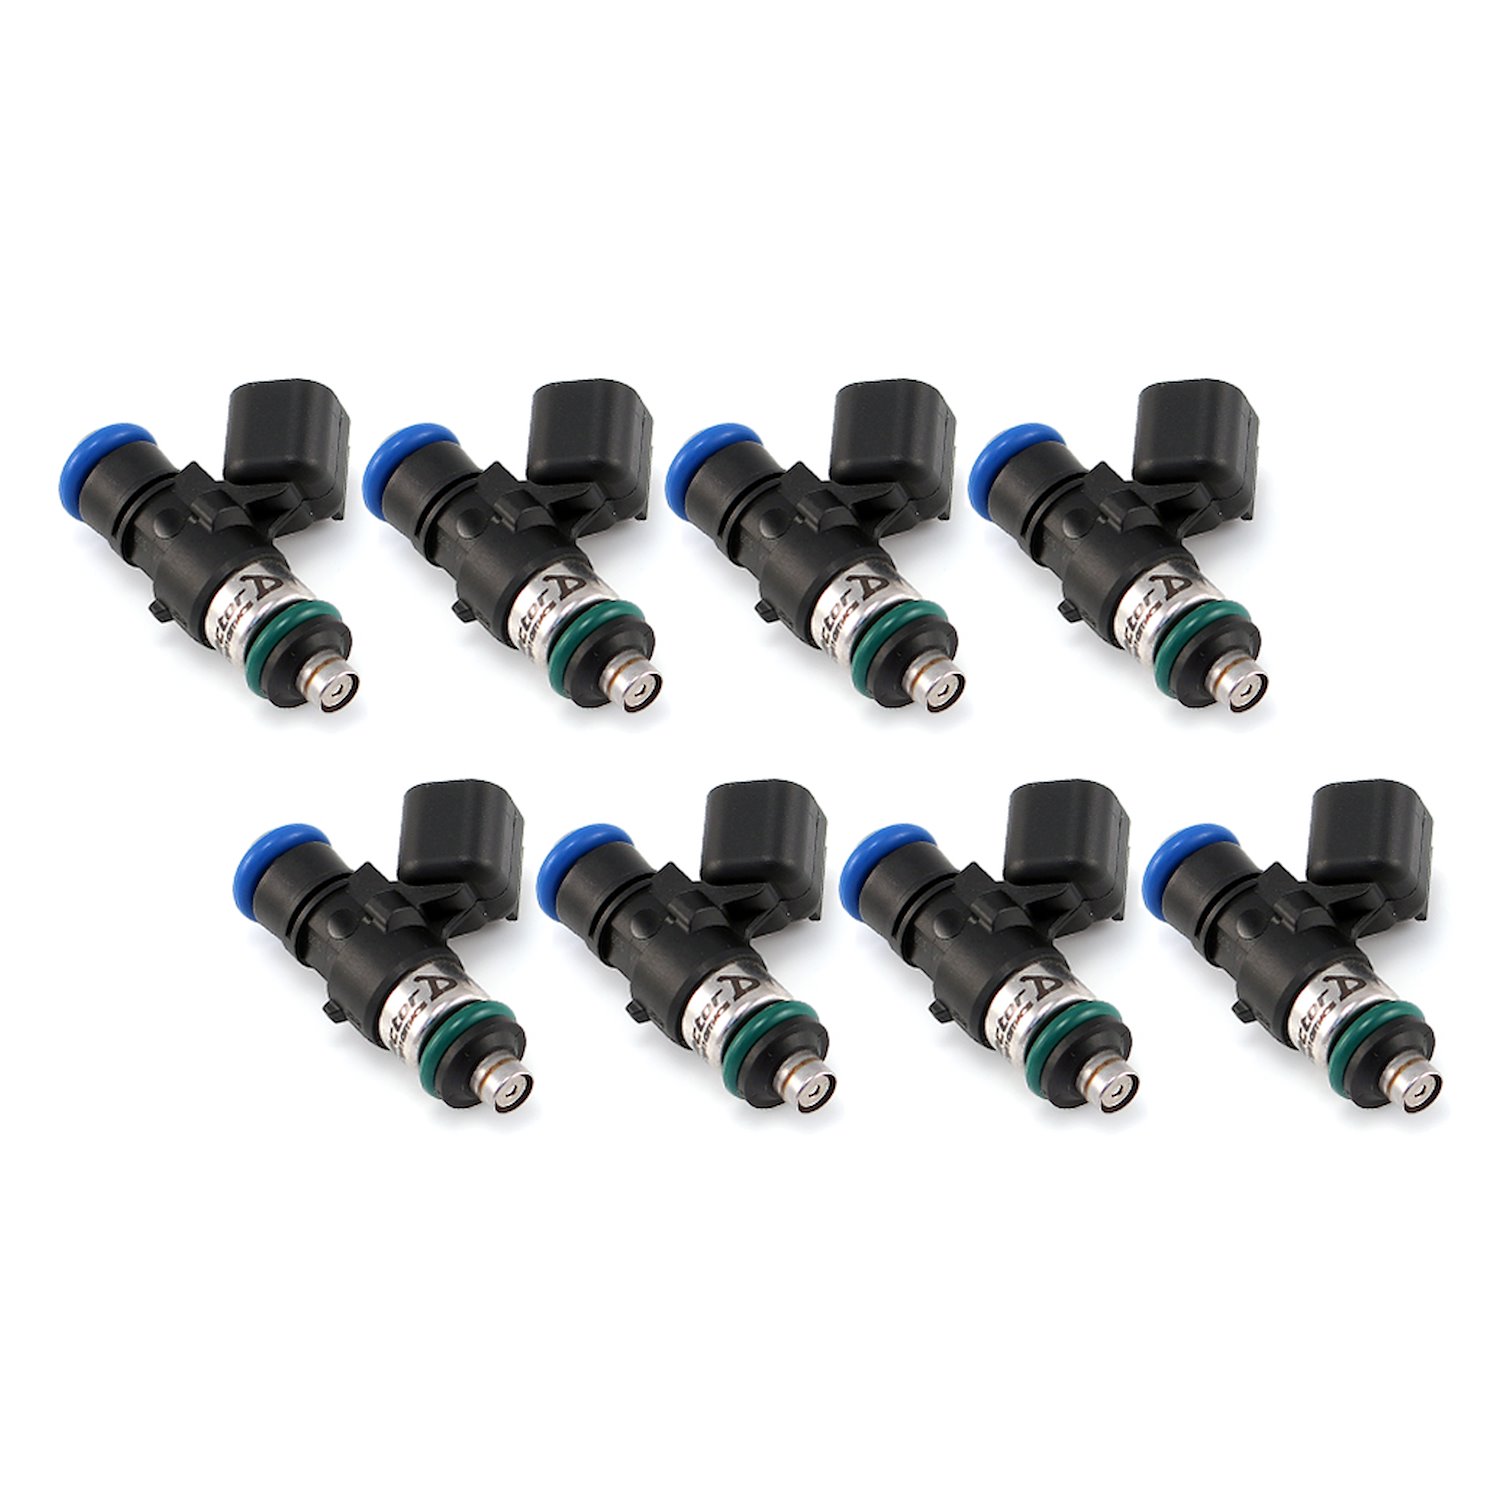 1050.34.14.14.8 1050cc Fuel Injector Set, 14 mm Lower O-Ring (No Adapter Top)